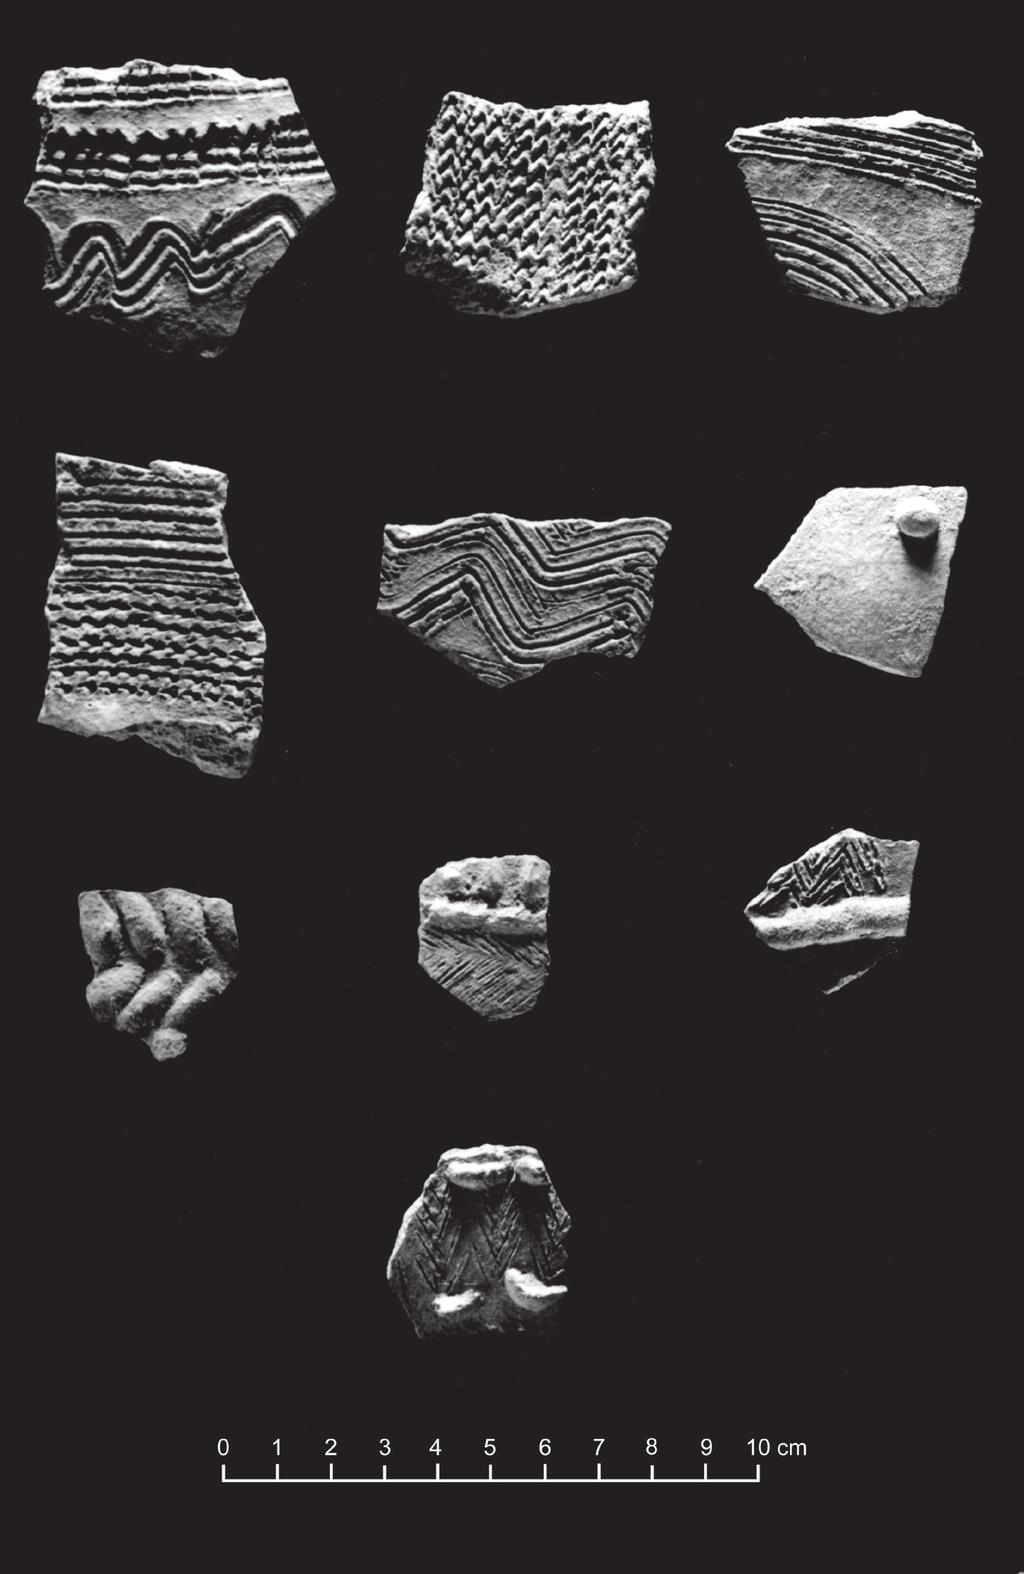 Ceramic assemblages from excavations on Viti Levu, Beqa-Ugaga and Mago Island 263 Figure 117. Navatu 17A, Layer 1 sherds decorated with shell impression, appliqué and incision.